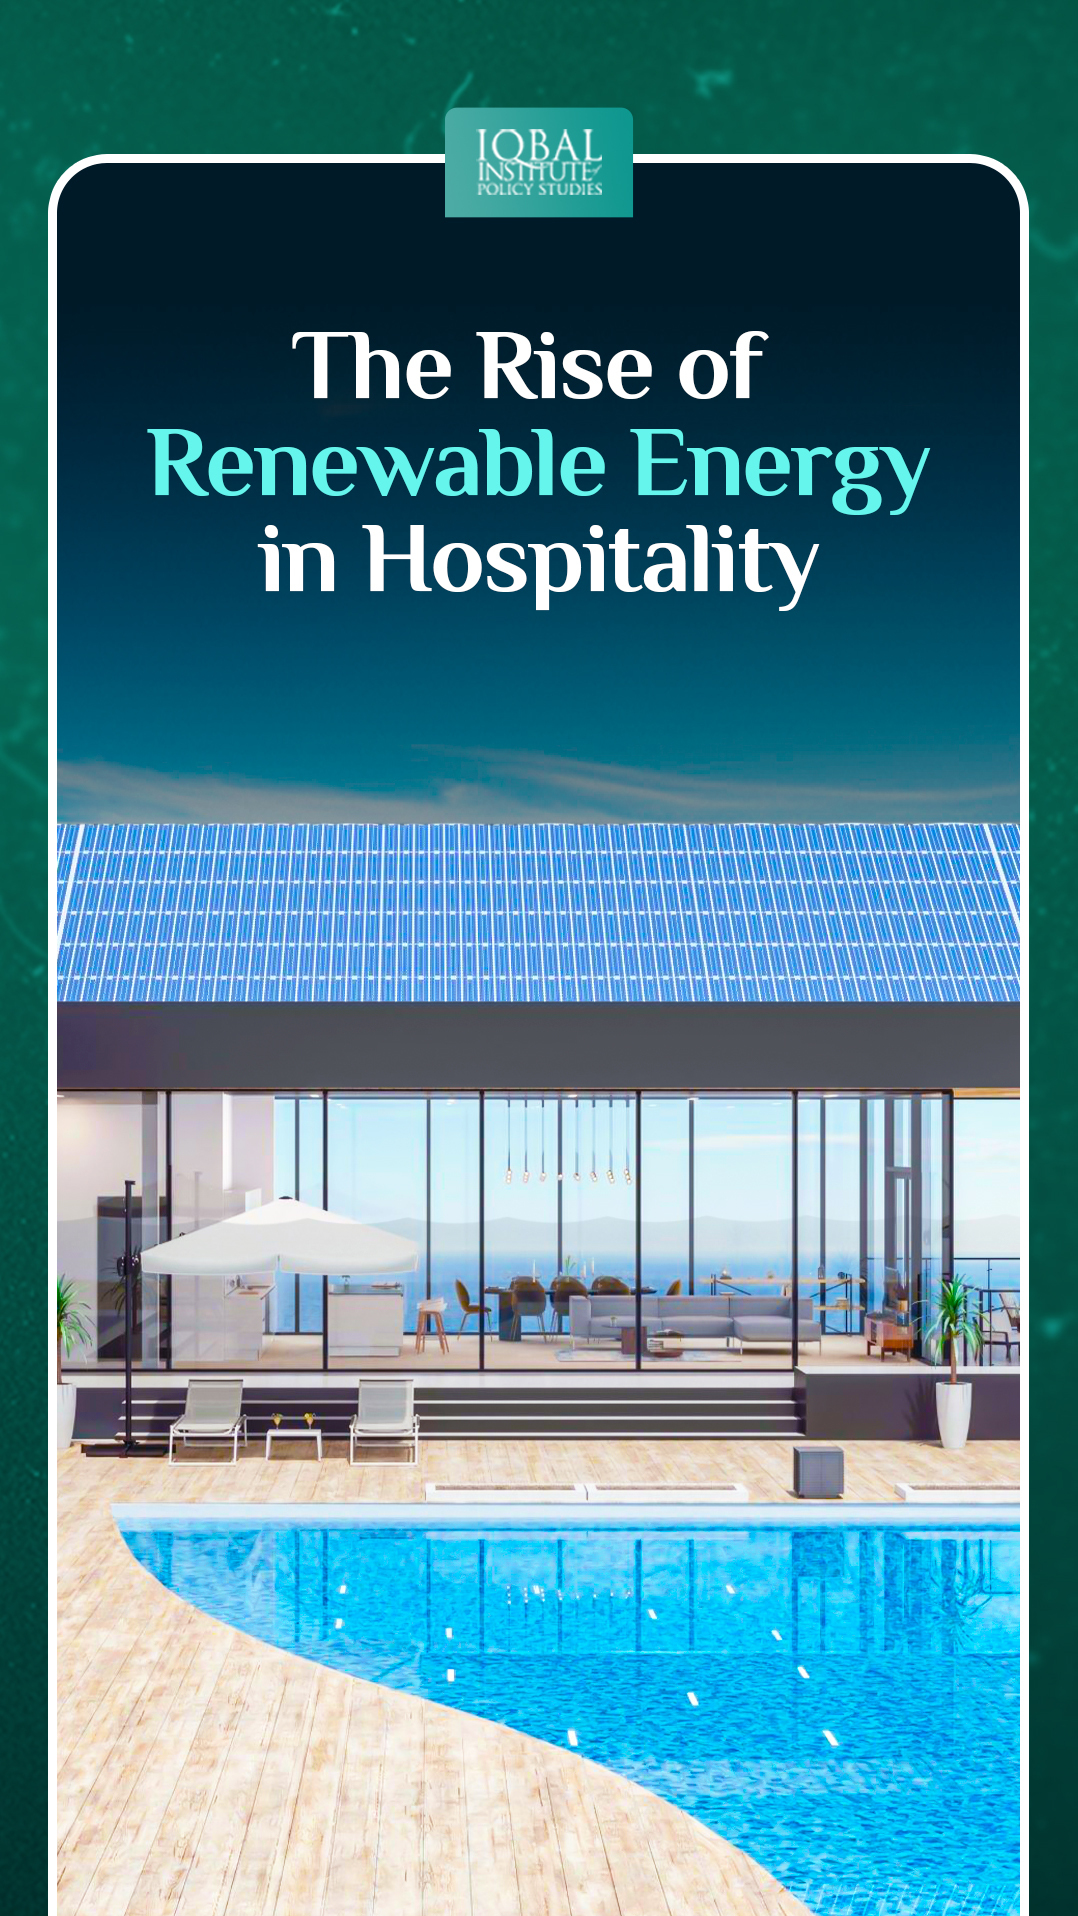 The Rise of Renewable Energy in Hospitality